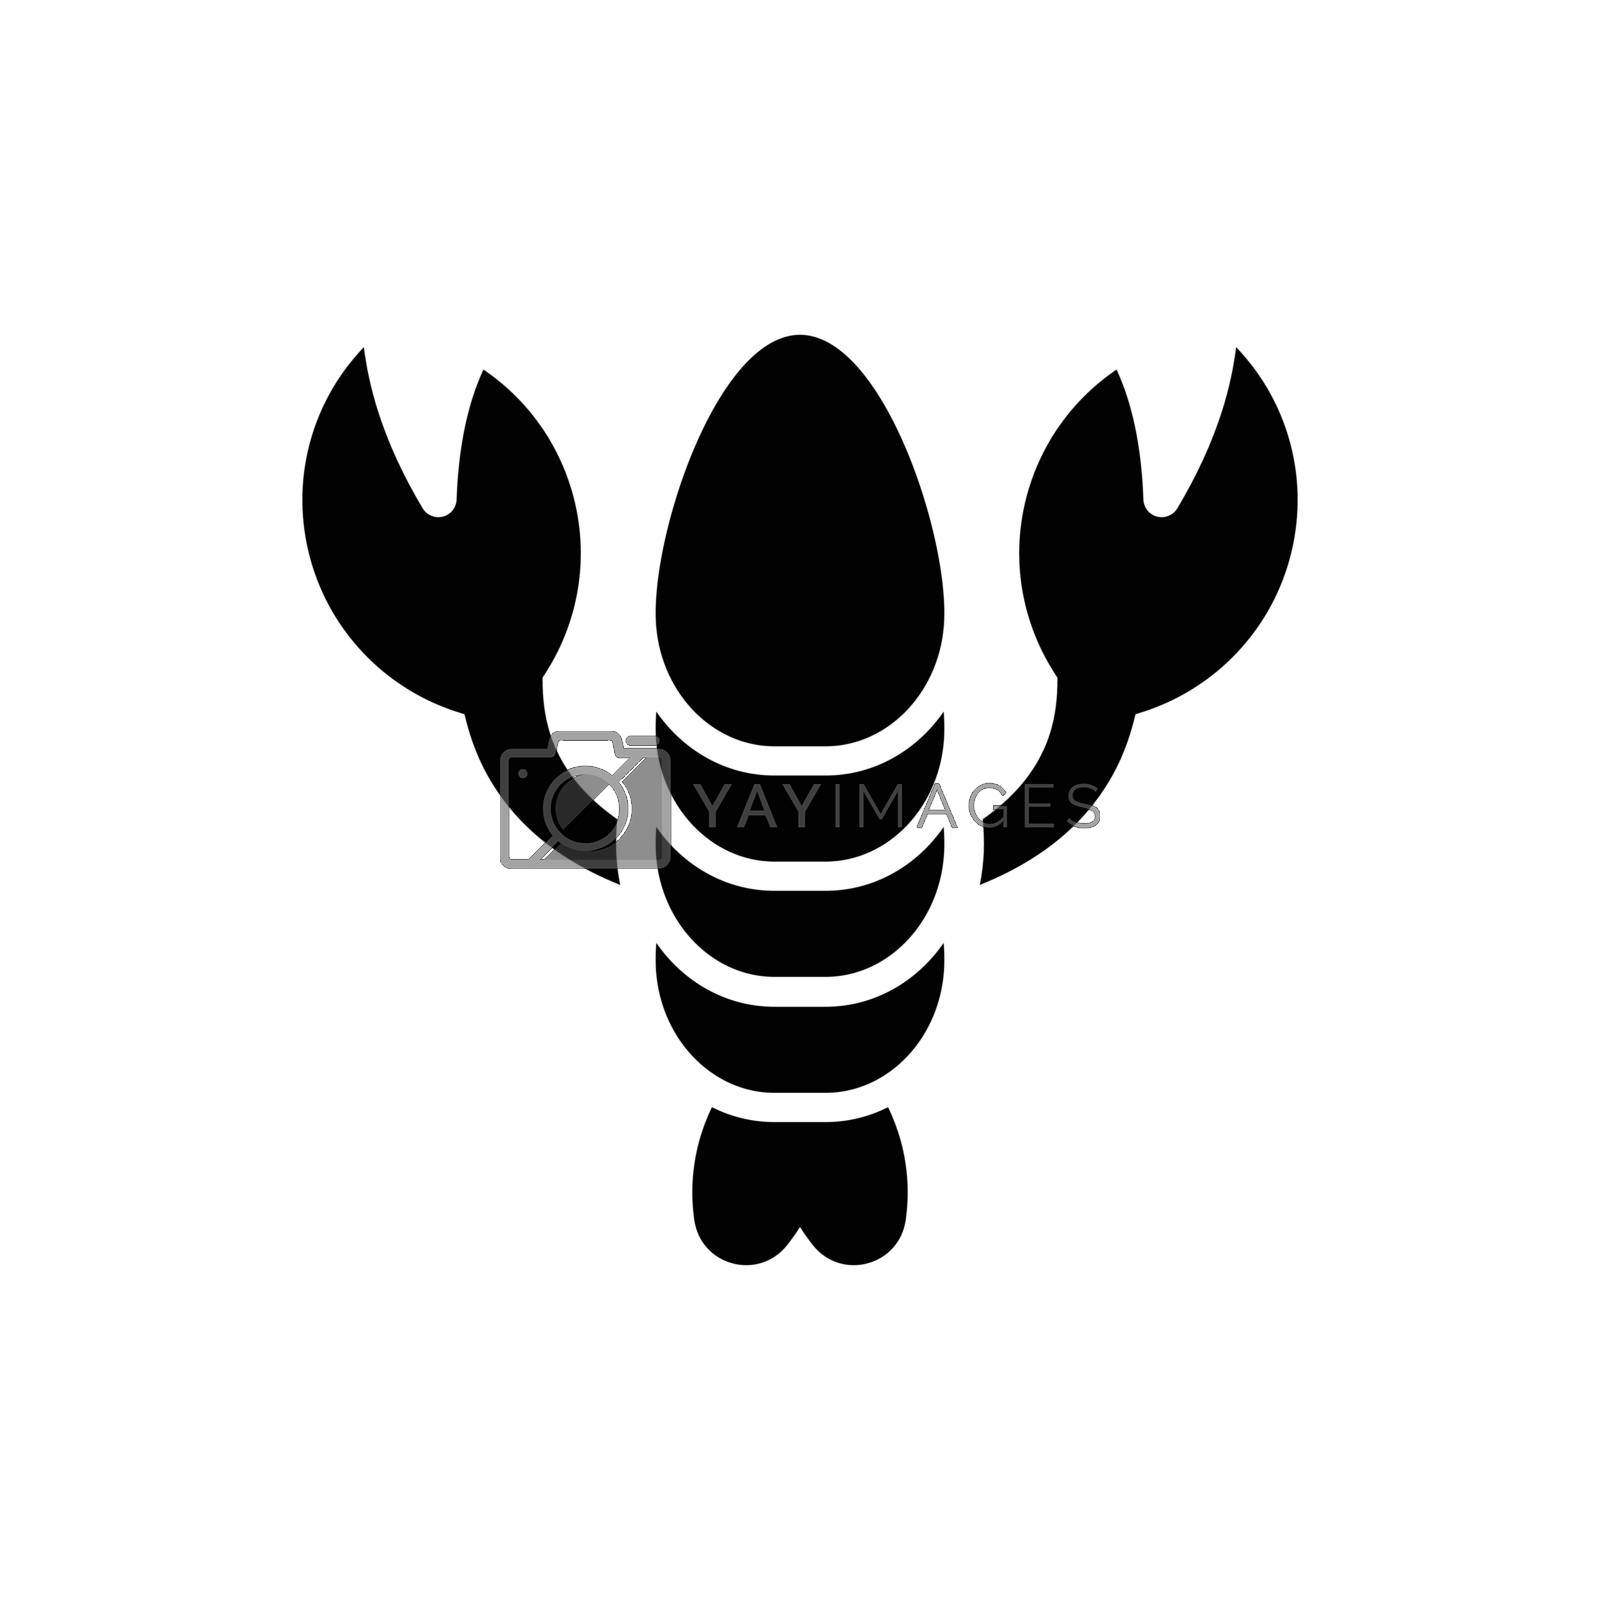 Royalty free image of Lobster icon by delwar018